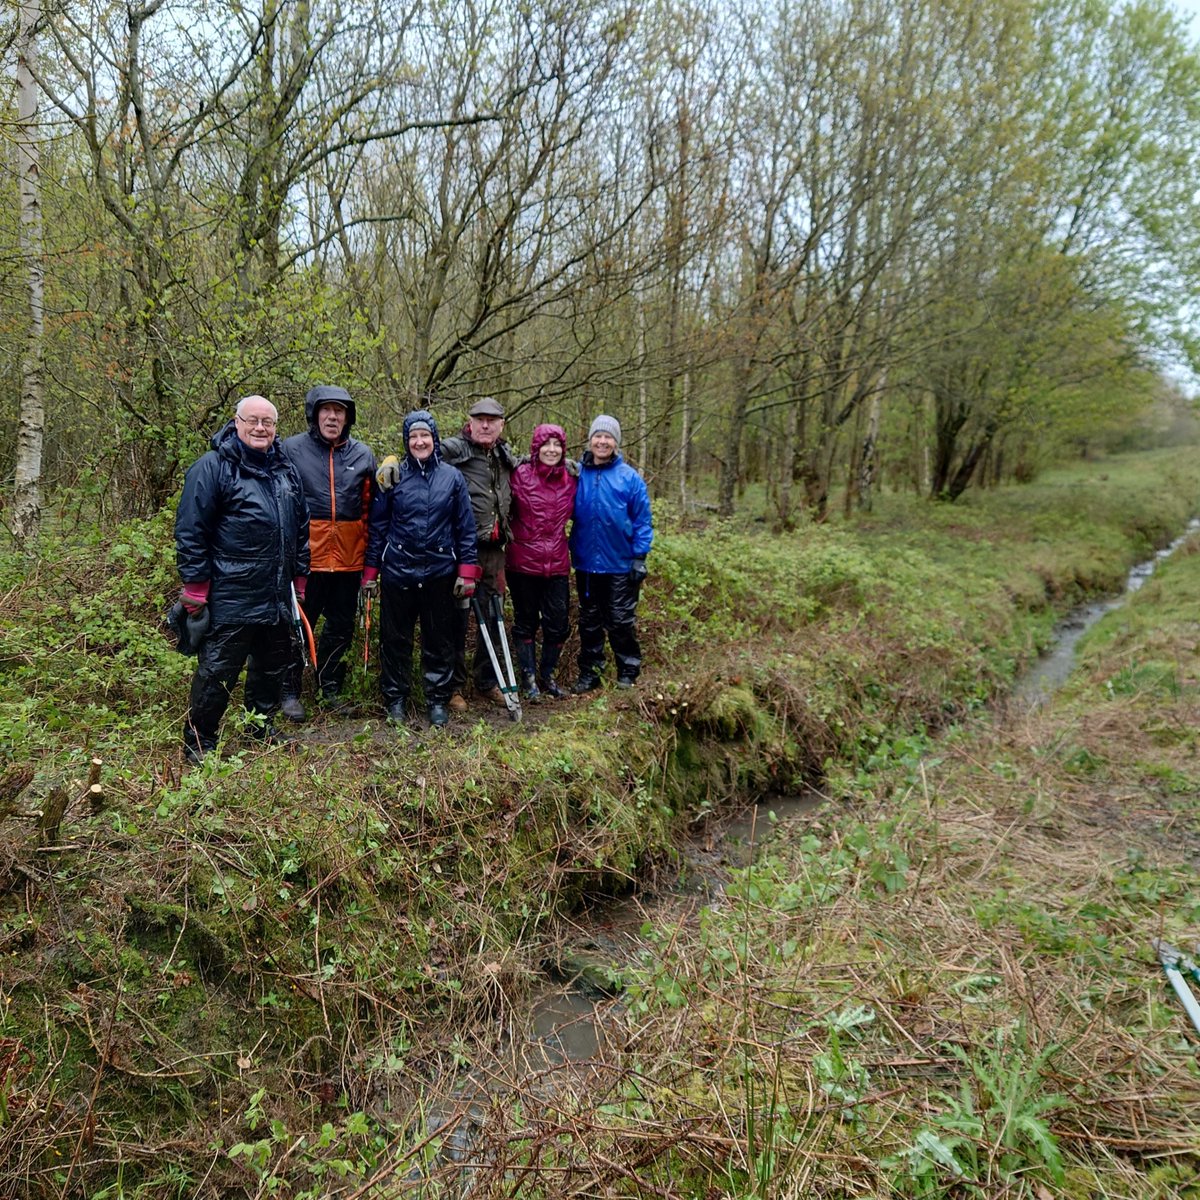 ✨ Our incredible volunteers didn’t let the rain stop them last weekend! Together, we made significant progress in clearing the new growth in the waterways at Rainton Meadows, ensuring open corridors for wildlife while preventing flooding. Get involved 👉 durhamwt.com/volunteer